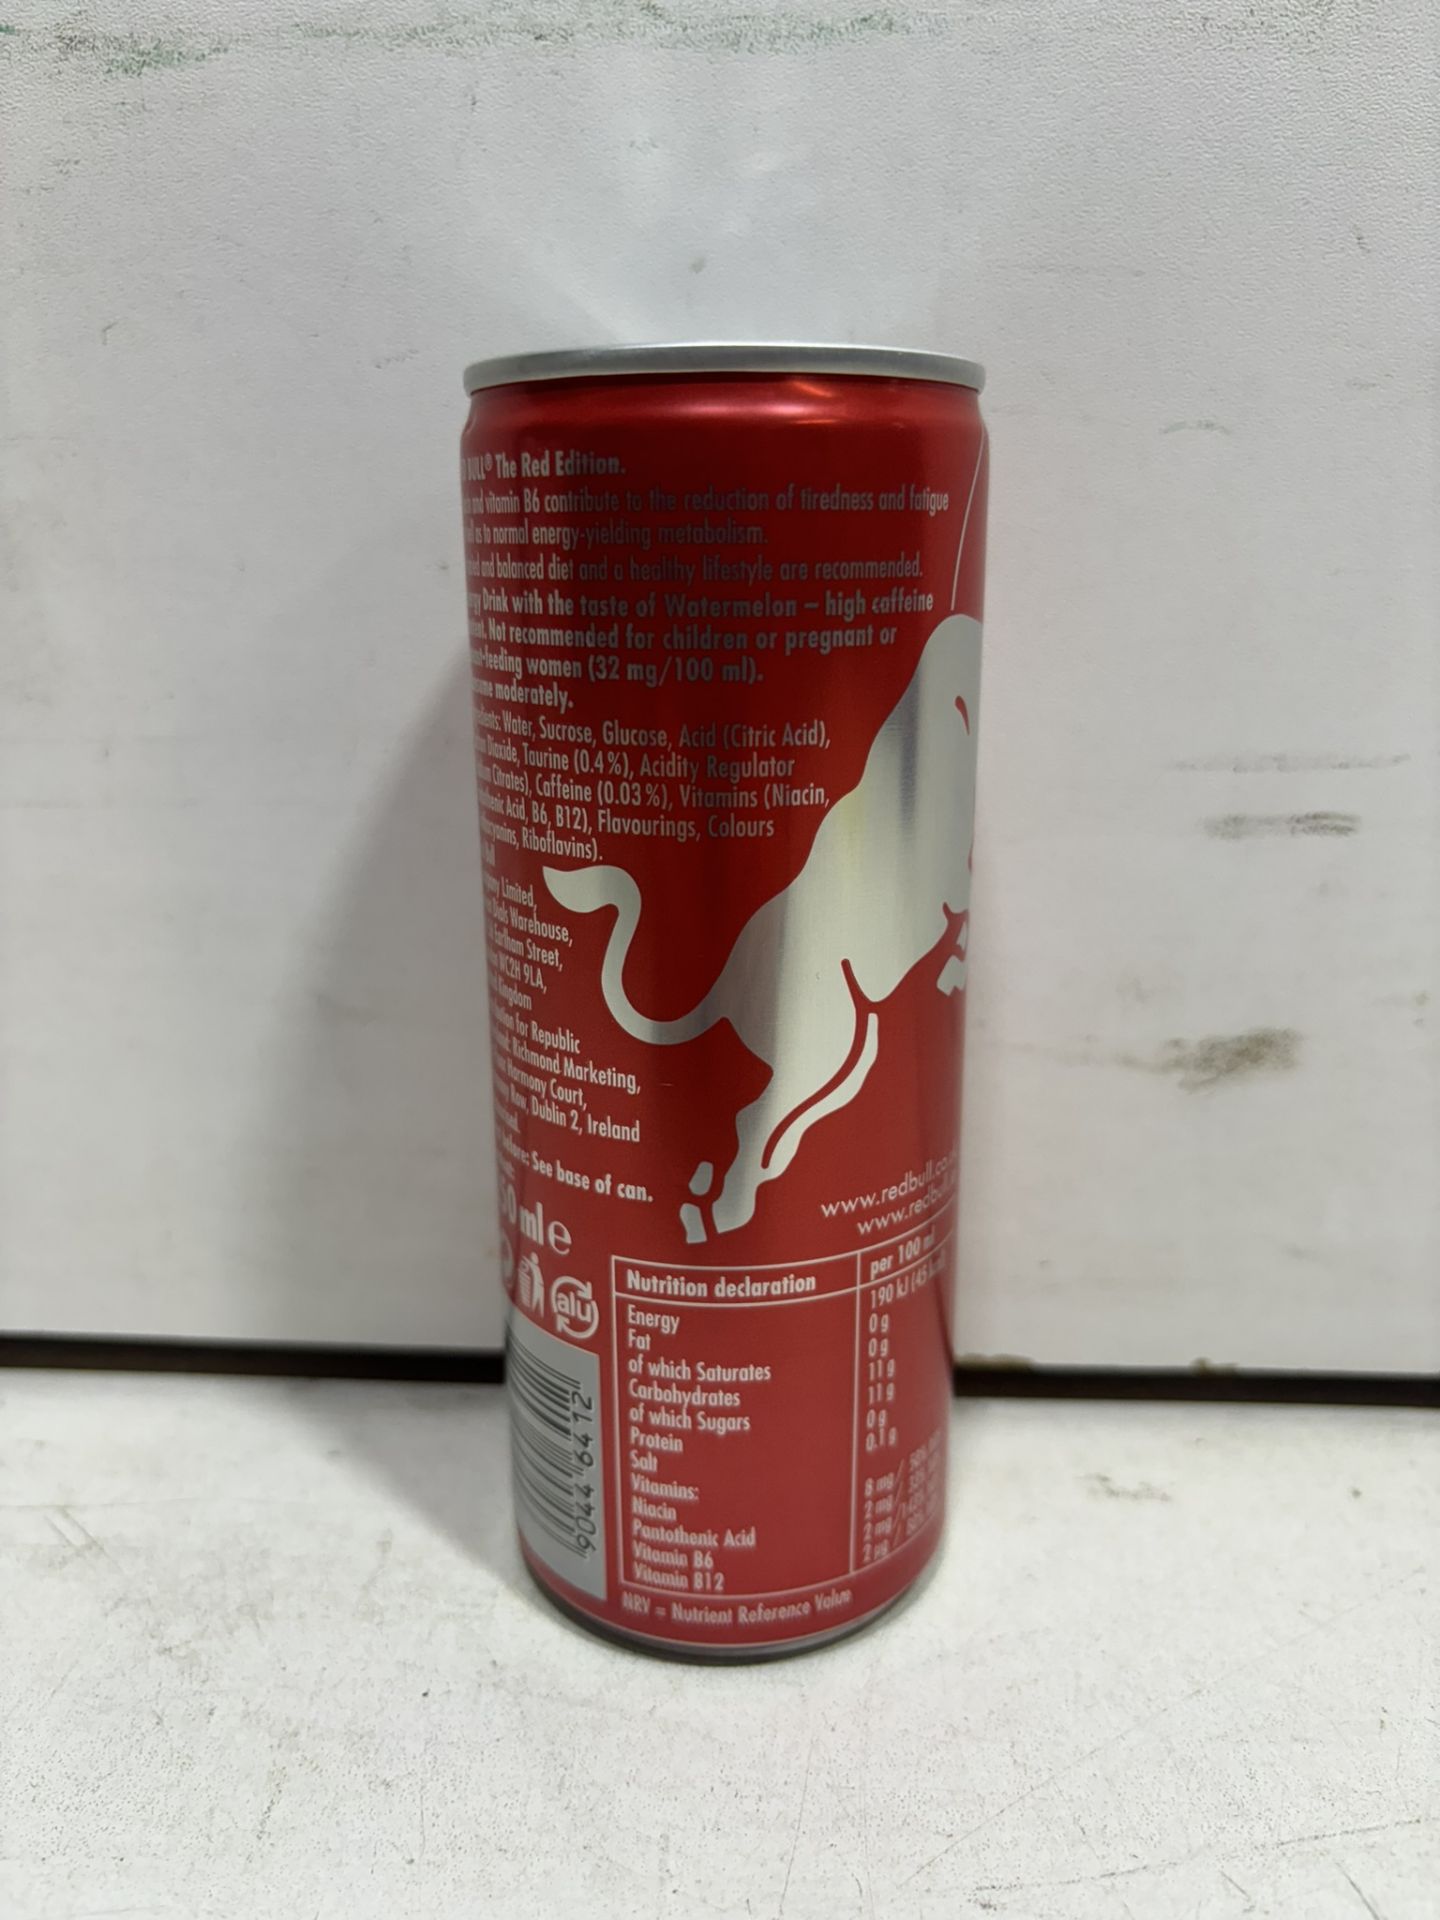 60 X Cans Of Red Bull 'The Red Edition' Watermelon Energy Drinks, 250Ml - Image 2 of 4